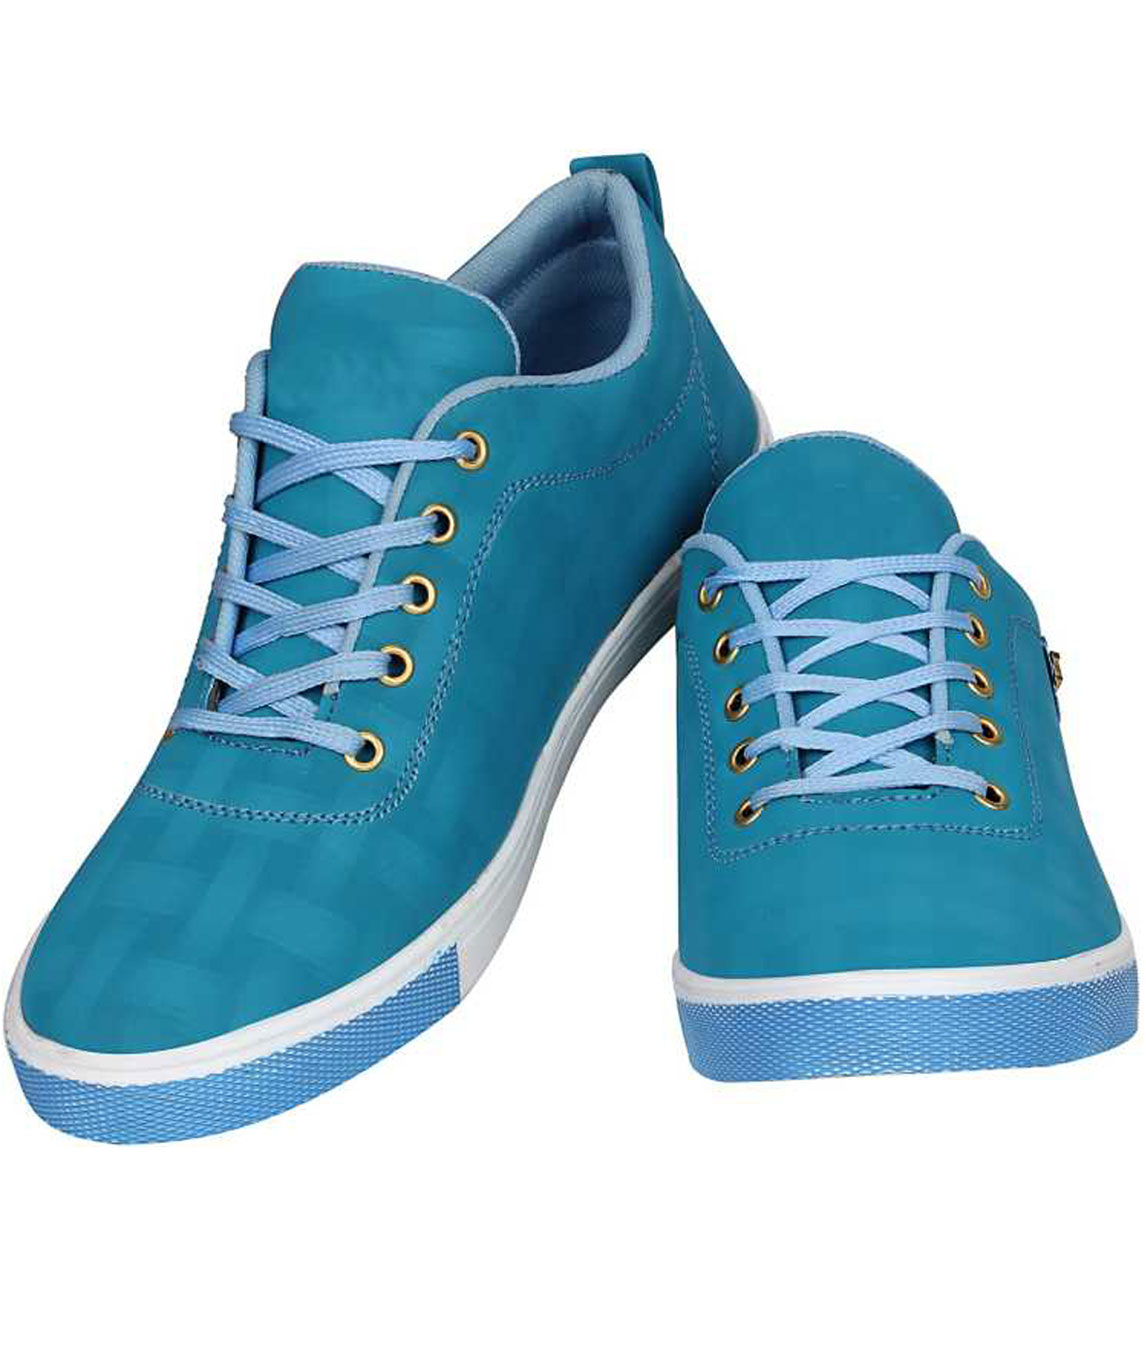 Buy Steprite Colour Blocked Unisex Sneakers Sky Blue for Both (6-7Years)  Online, Shop at FirstCry.com - 14379399